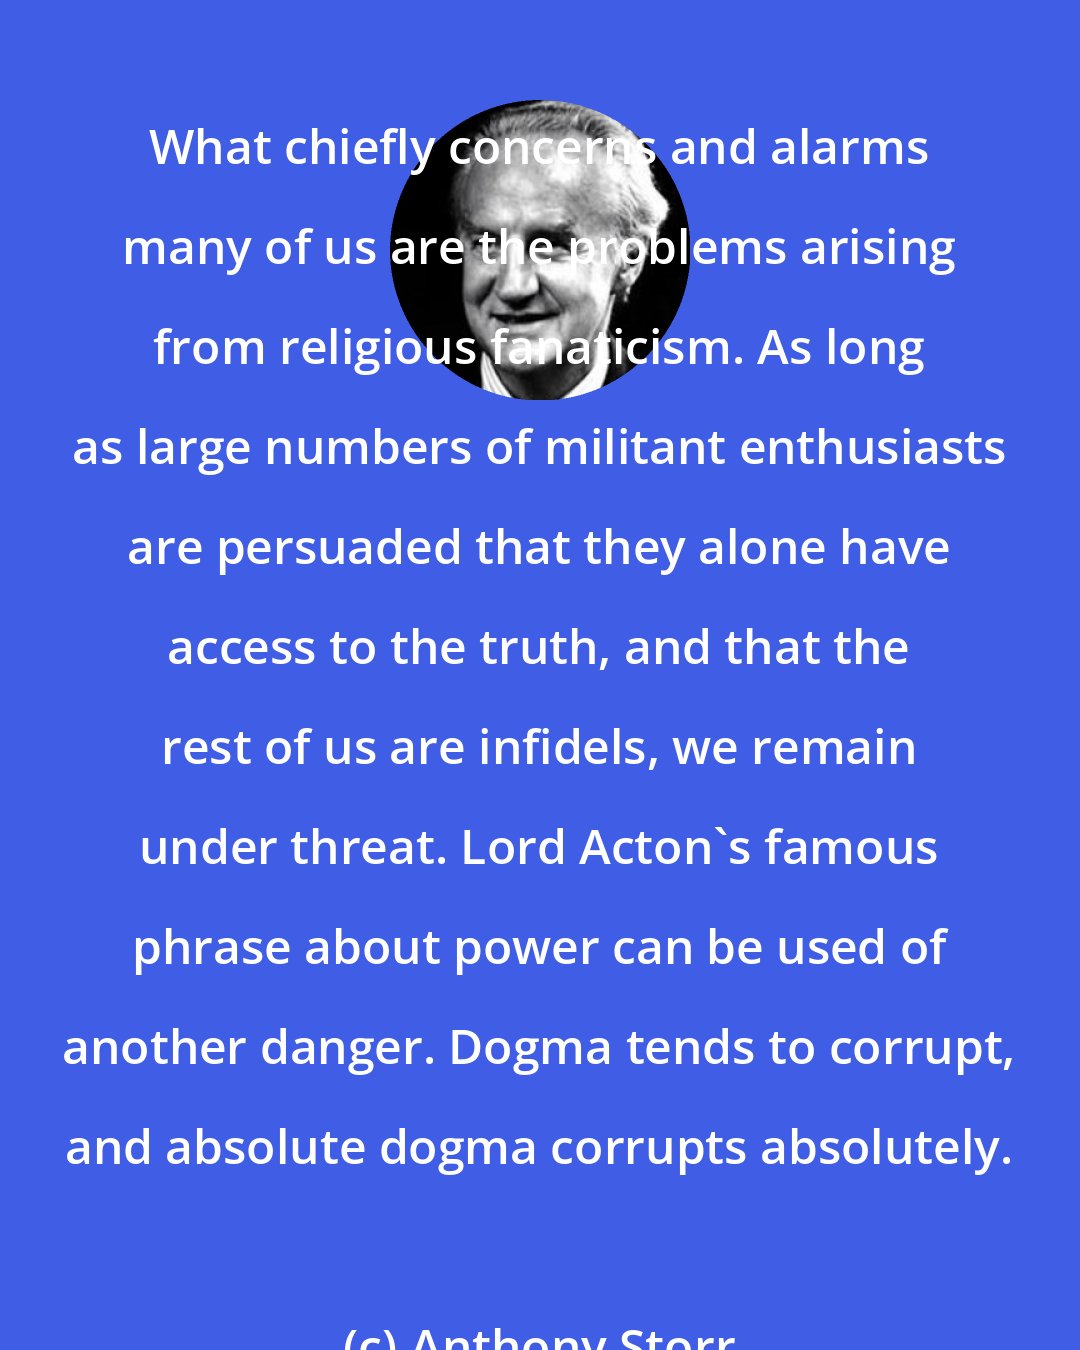 Anthony Storr: What chiefly concerns and alarms many of us are the problems arising from religious fanaticism. As long as large numbers of militant enthusiasts are persuaded that they alone have access to the truth, and that the rest of us are infidels, we remain under threat. Lord Acton's famous phrase about power can be used of another danger. Dogma tends to corrupt, and absolute dogma corrupts absolutely.